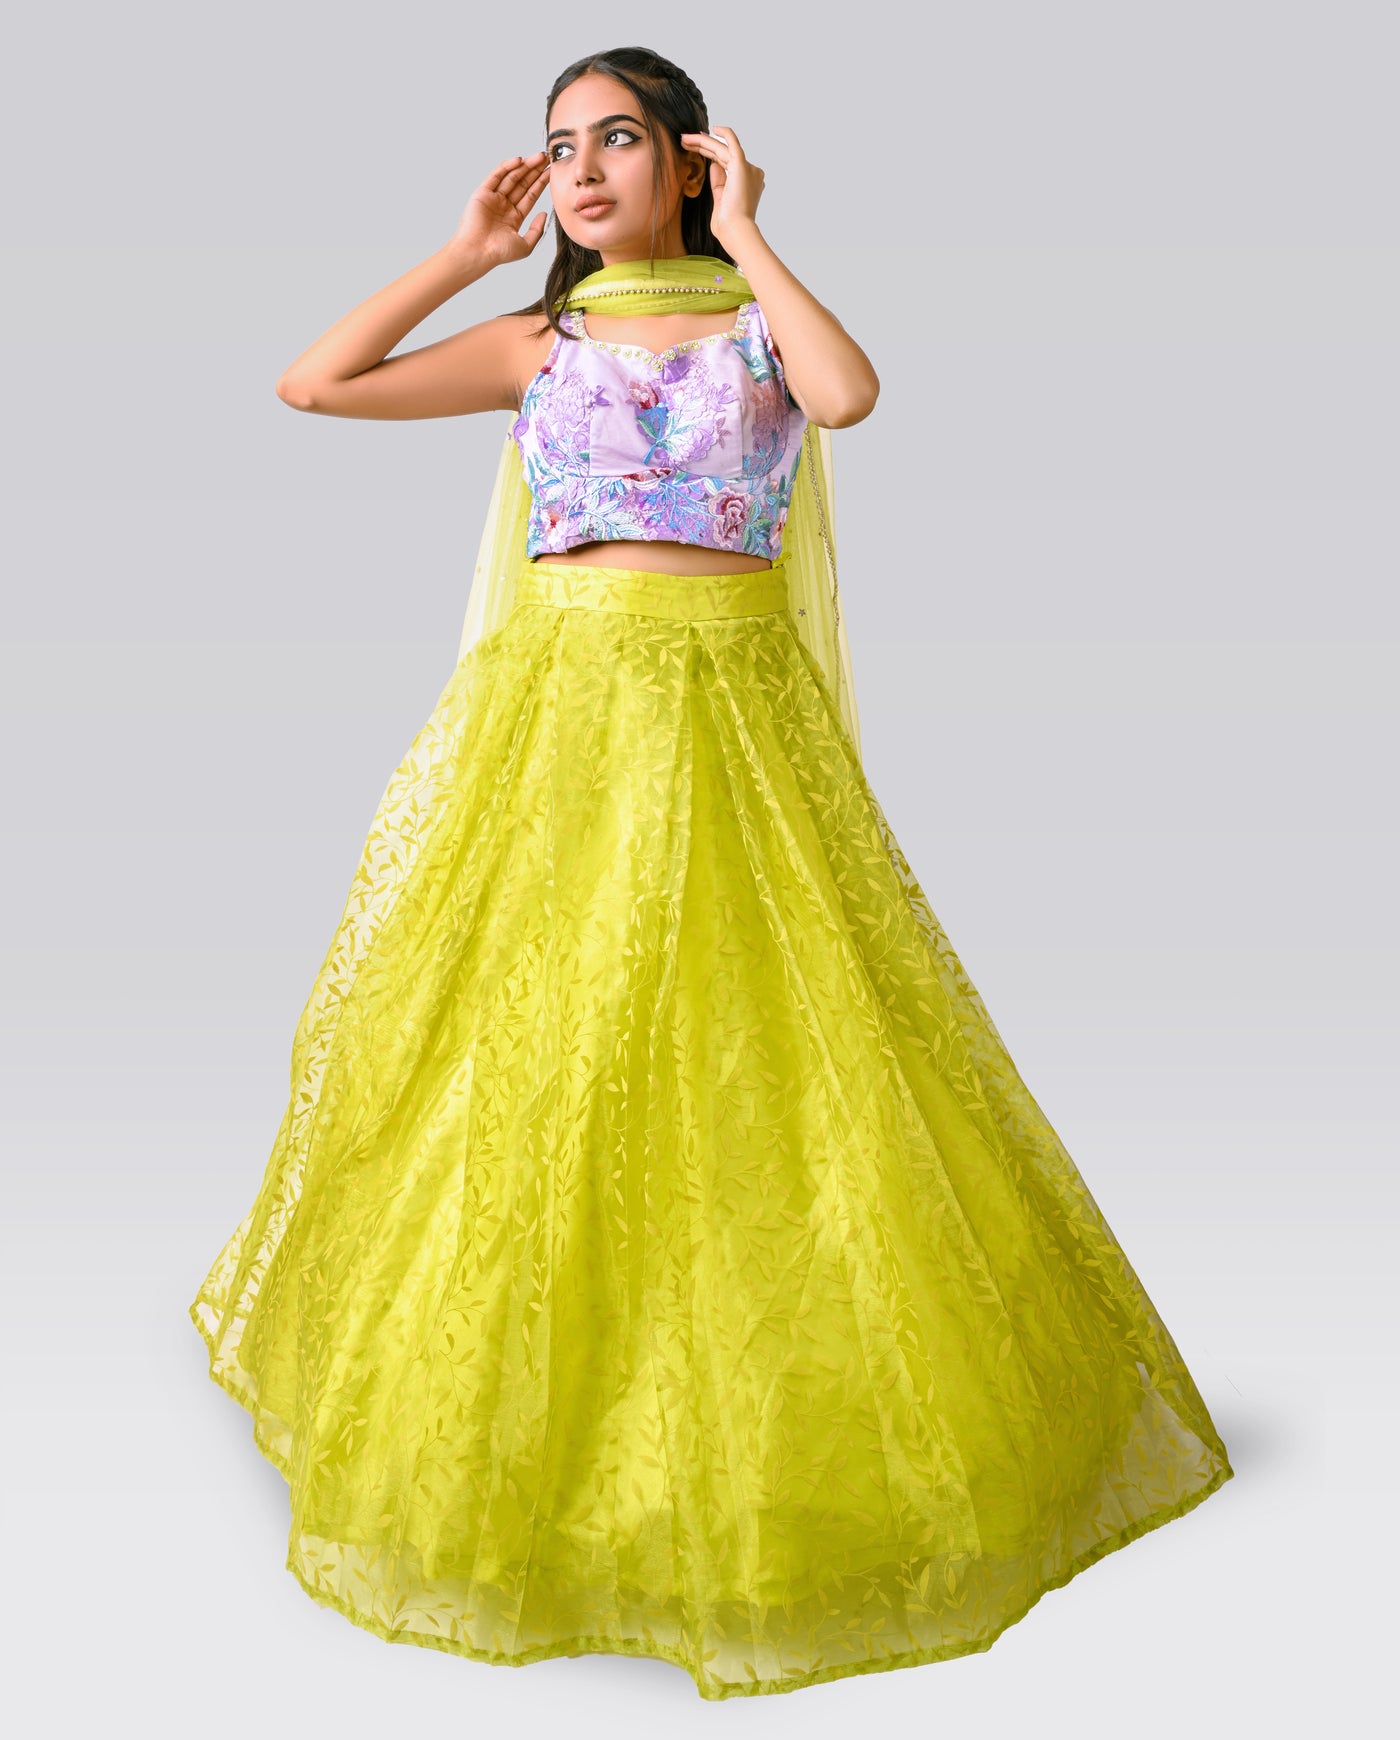 Leafy Lehenga in Yellow - Indian Clothing in Denver, CO, Aurora, CO, Boulder, CO, Fort Collins, CO, Colorado Springs, CO, Parker, CO, Highlands Ranch, CO, Cherry Creek, CO, Centennial, CO, and Longmont, CO. Nationwide shipping USA - India Fashion X